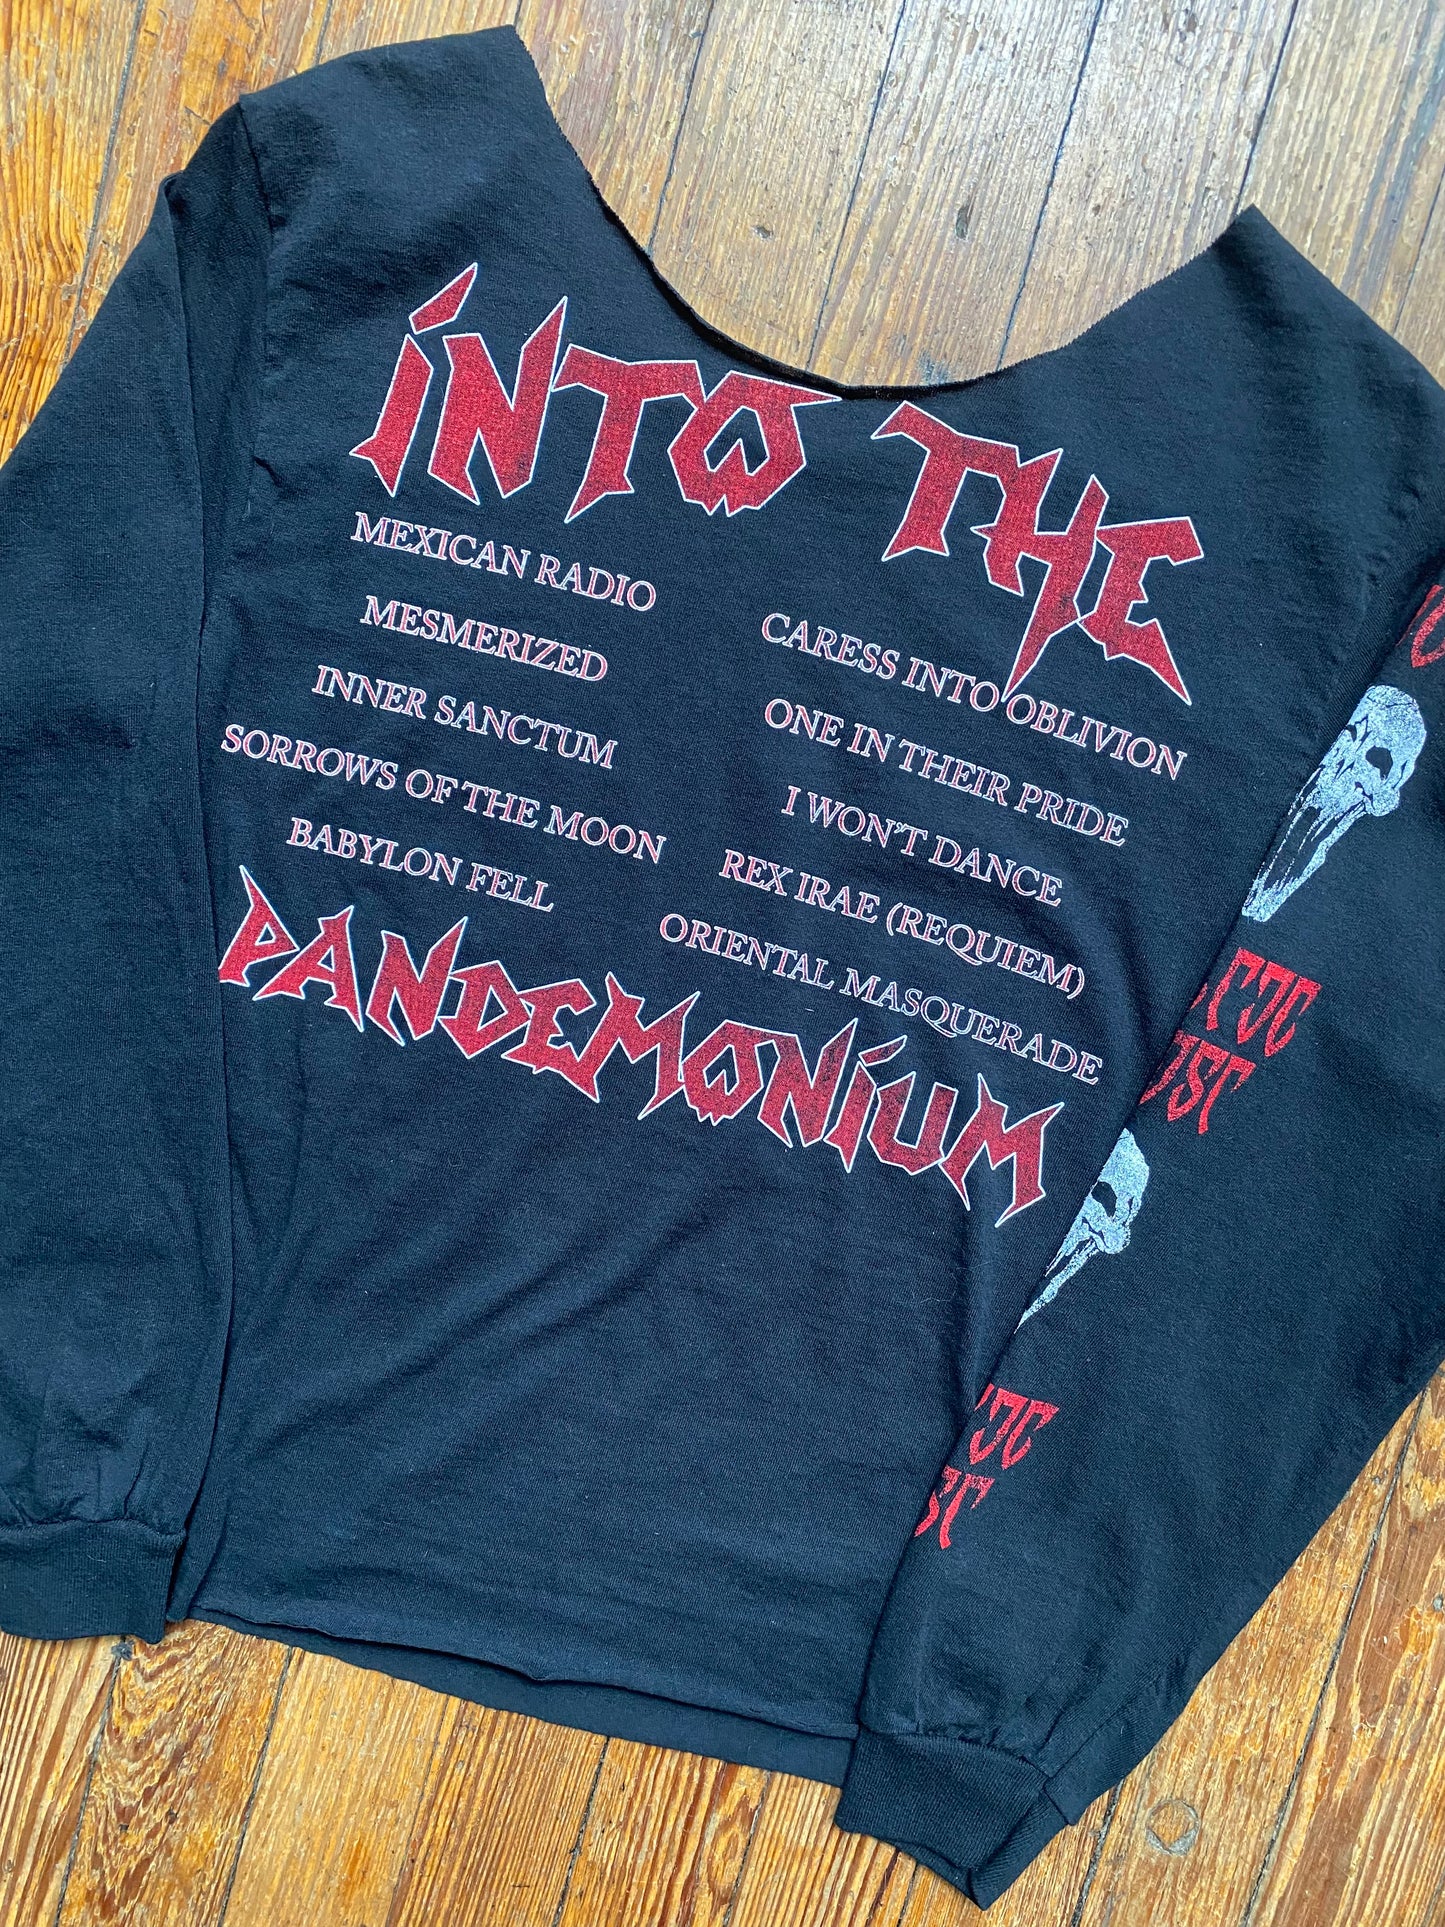 Celtic Frost “Into the Pandemonium” Altered Collar Long Sleeve Cropped Shirt